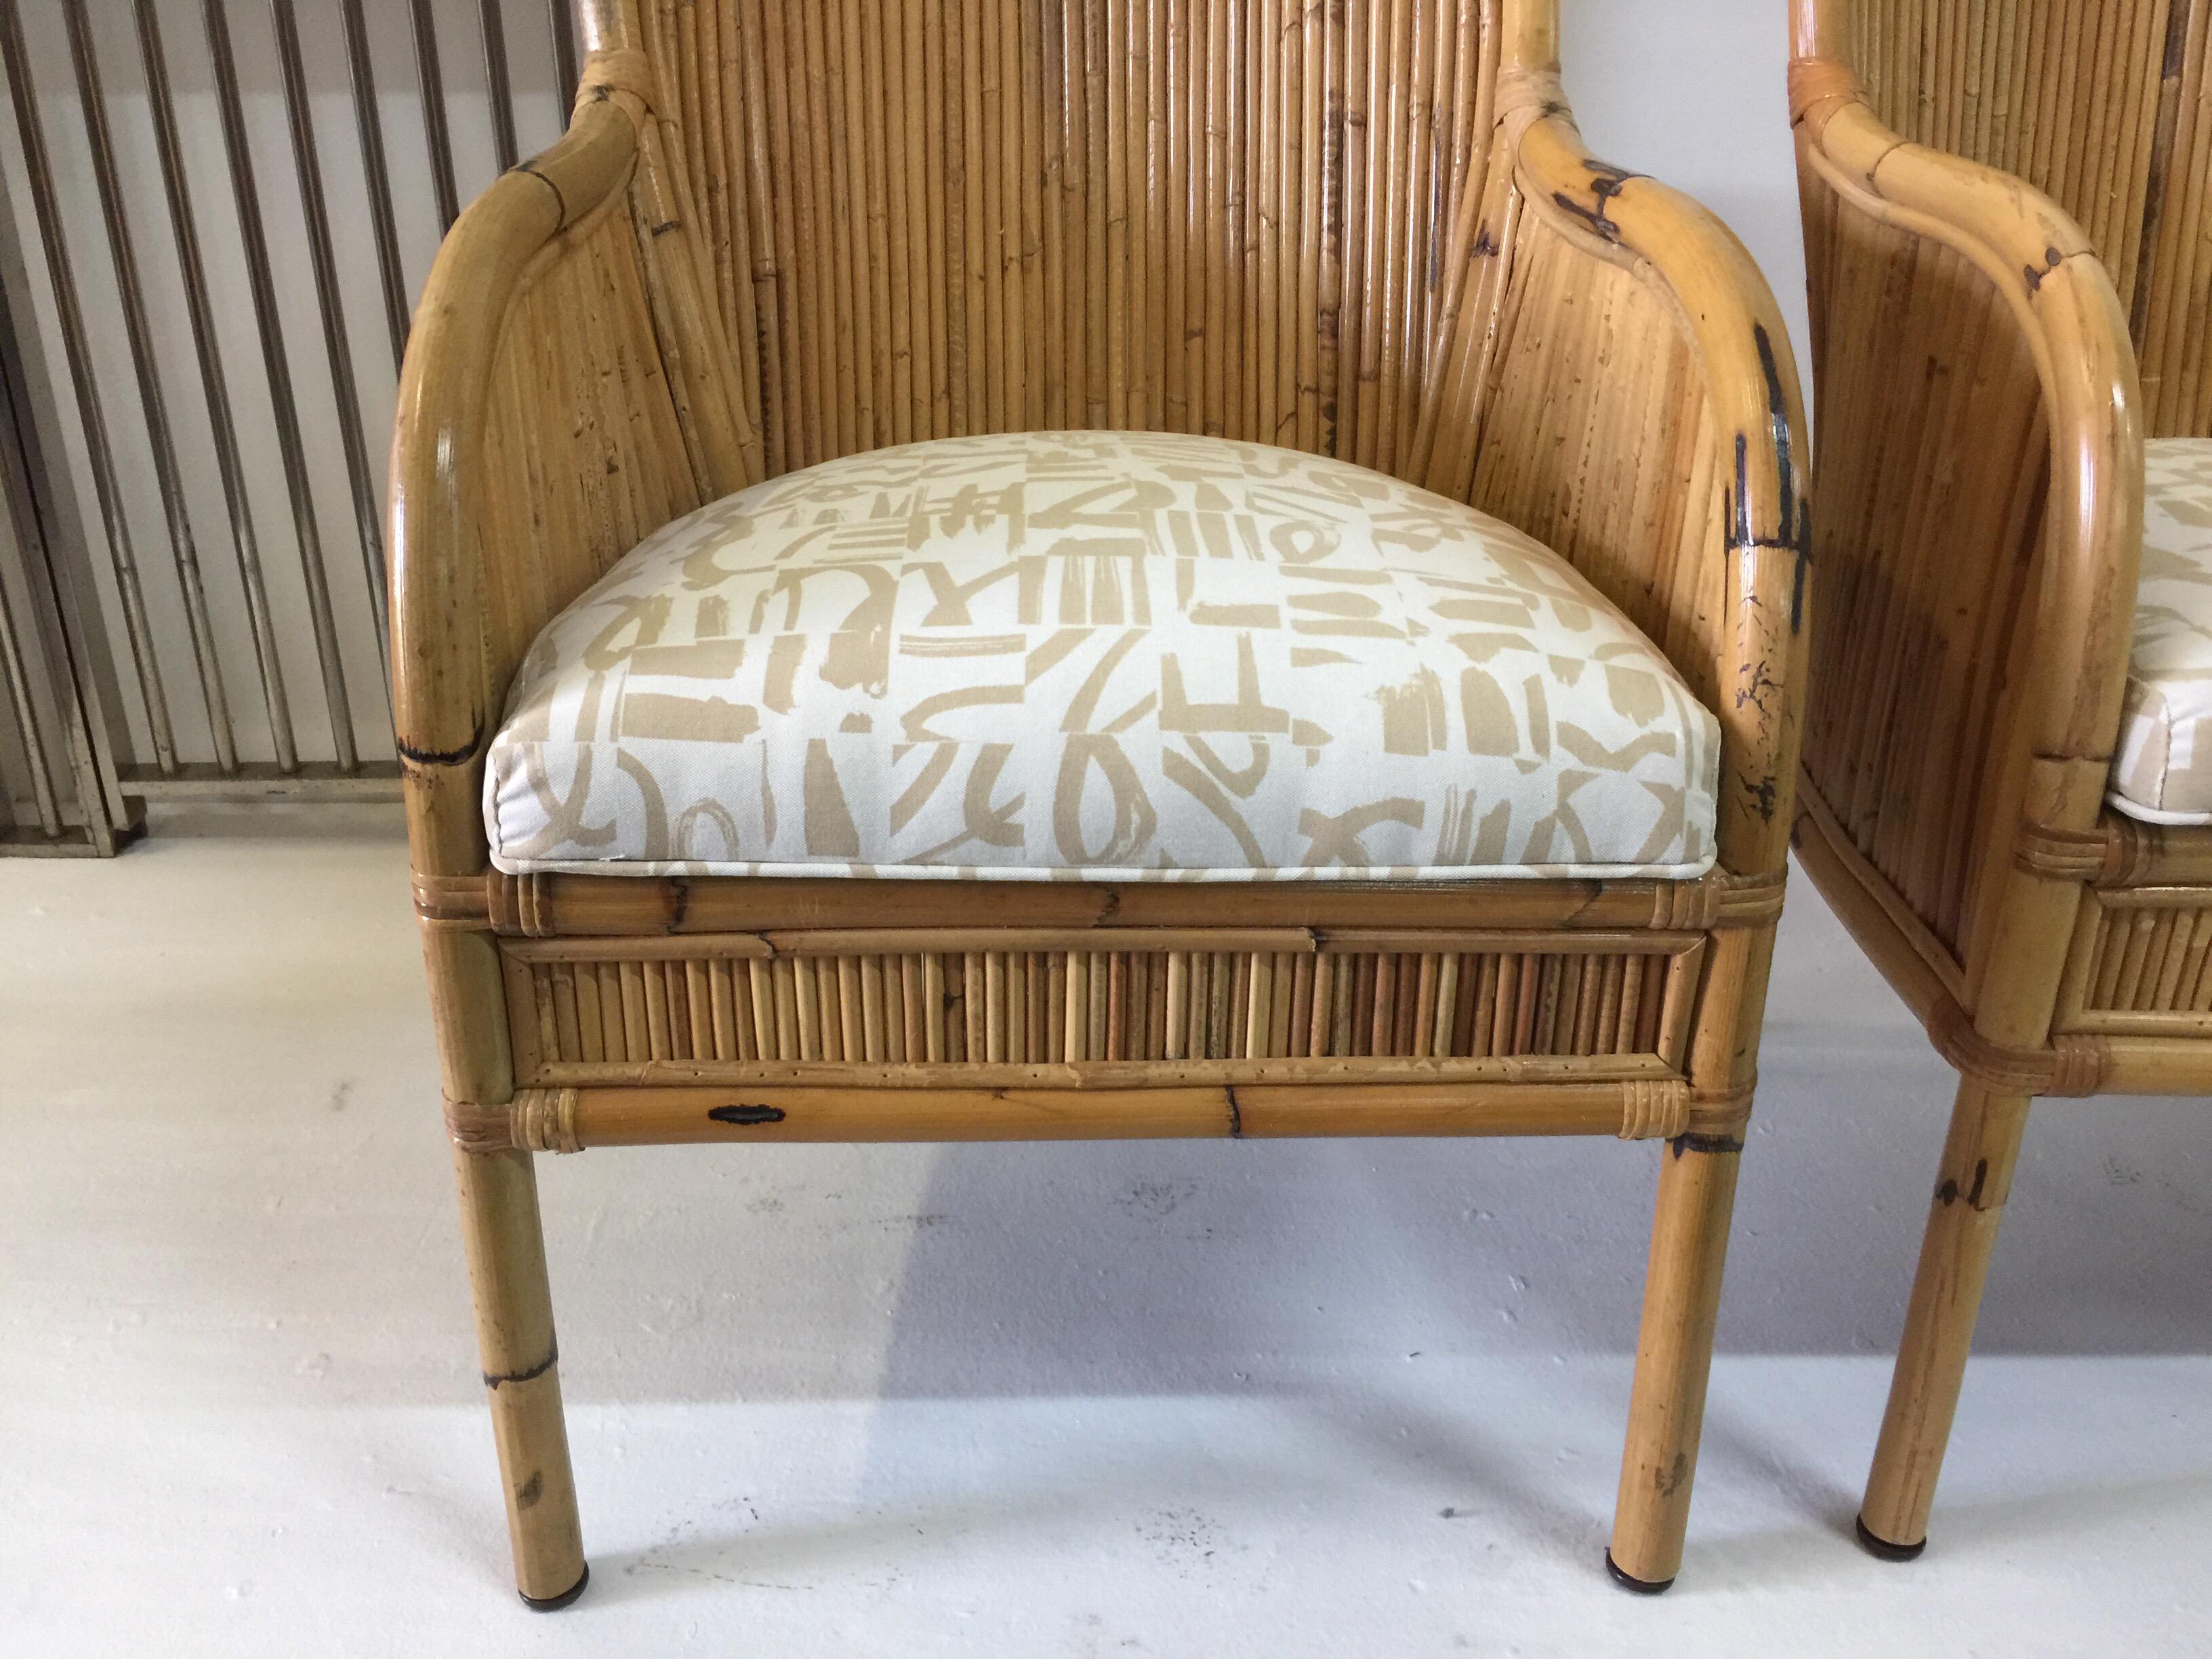 Vintage Henry Olko Set of 4 Bamboo Chairs In Good Condition For Sale In East Hampton, NY